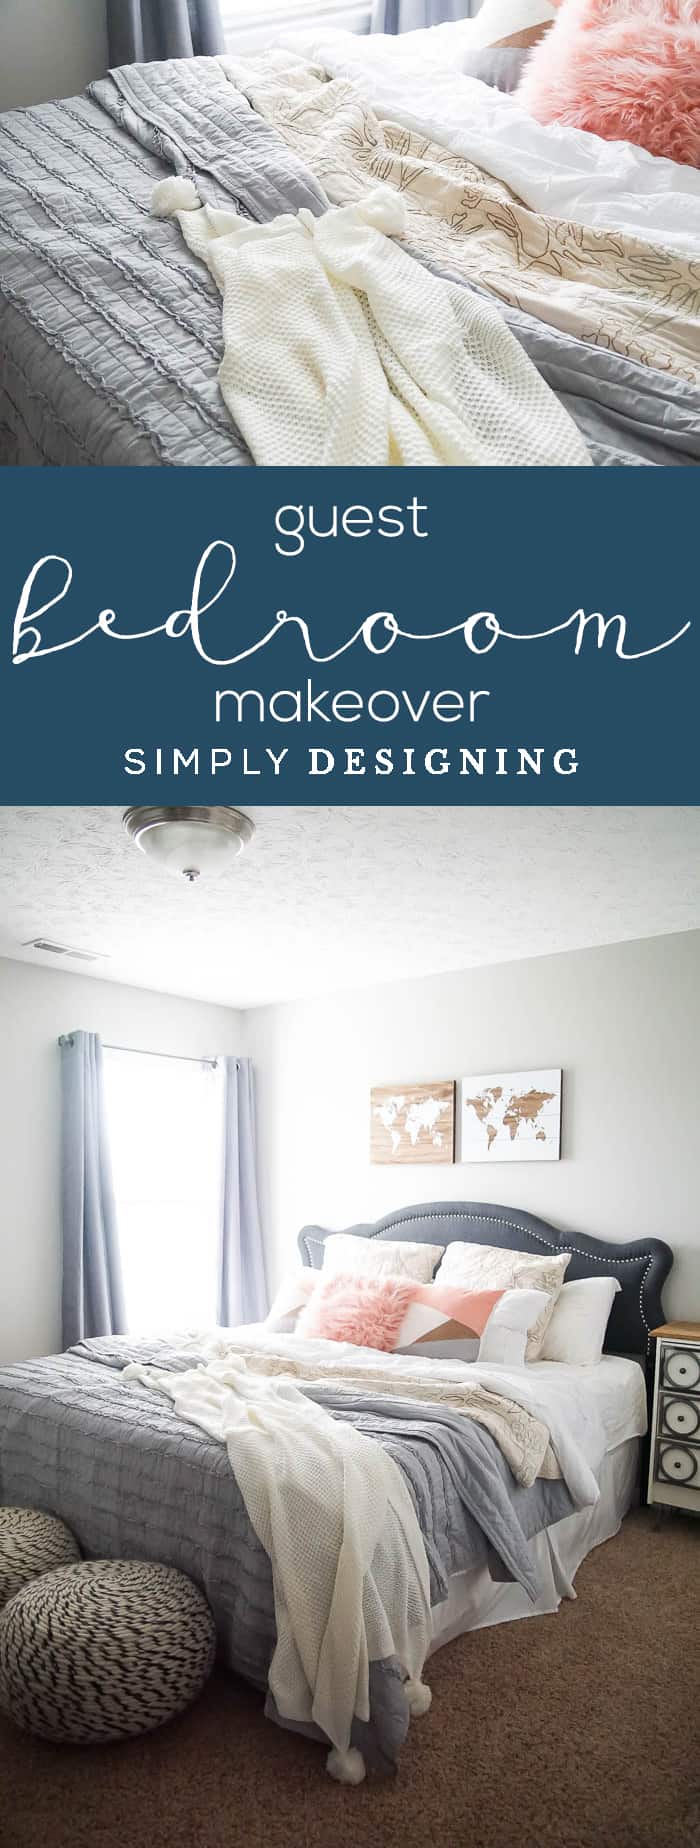 Guest Bedroom Makeover - Layer bedding and pillow - make a guest room comfortable - bedroom makeover before and after